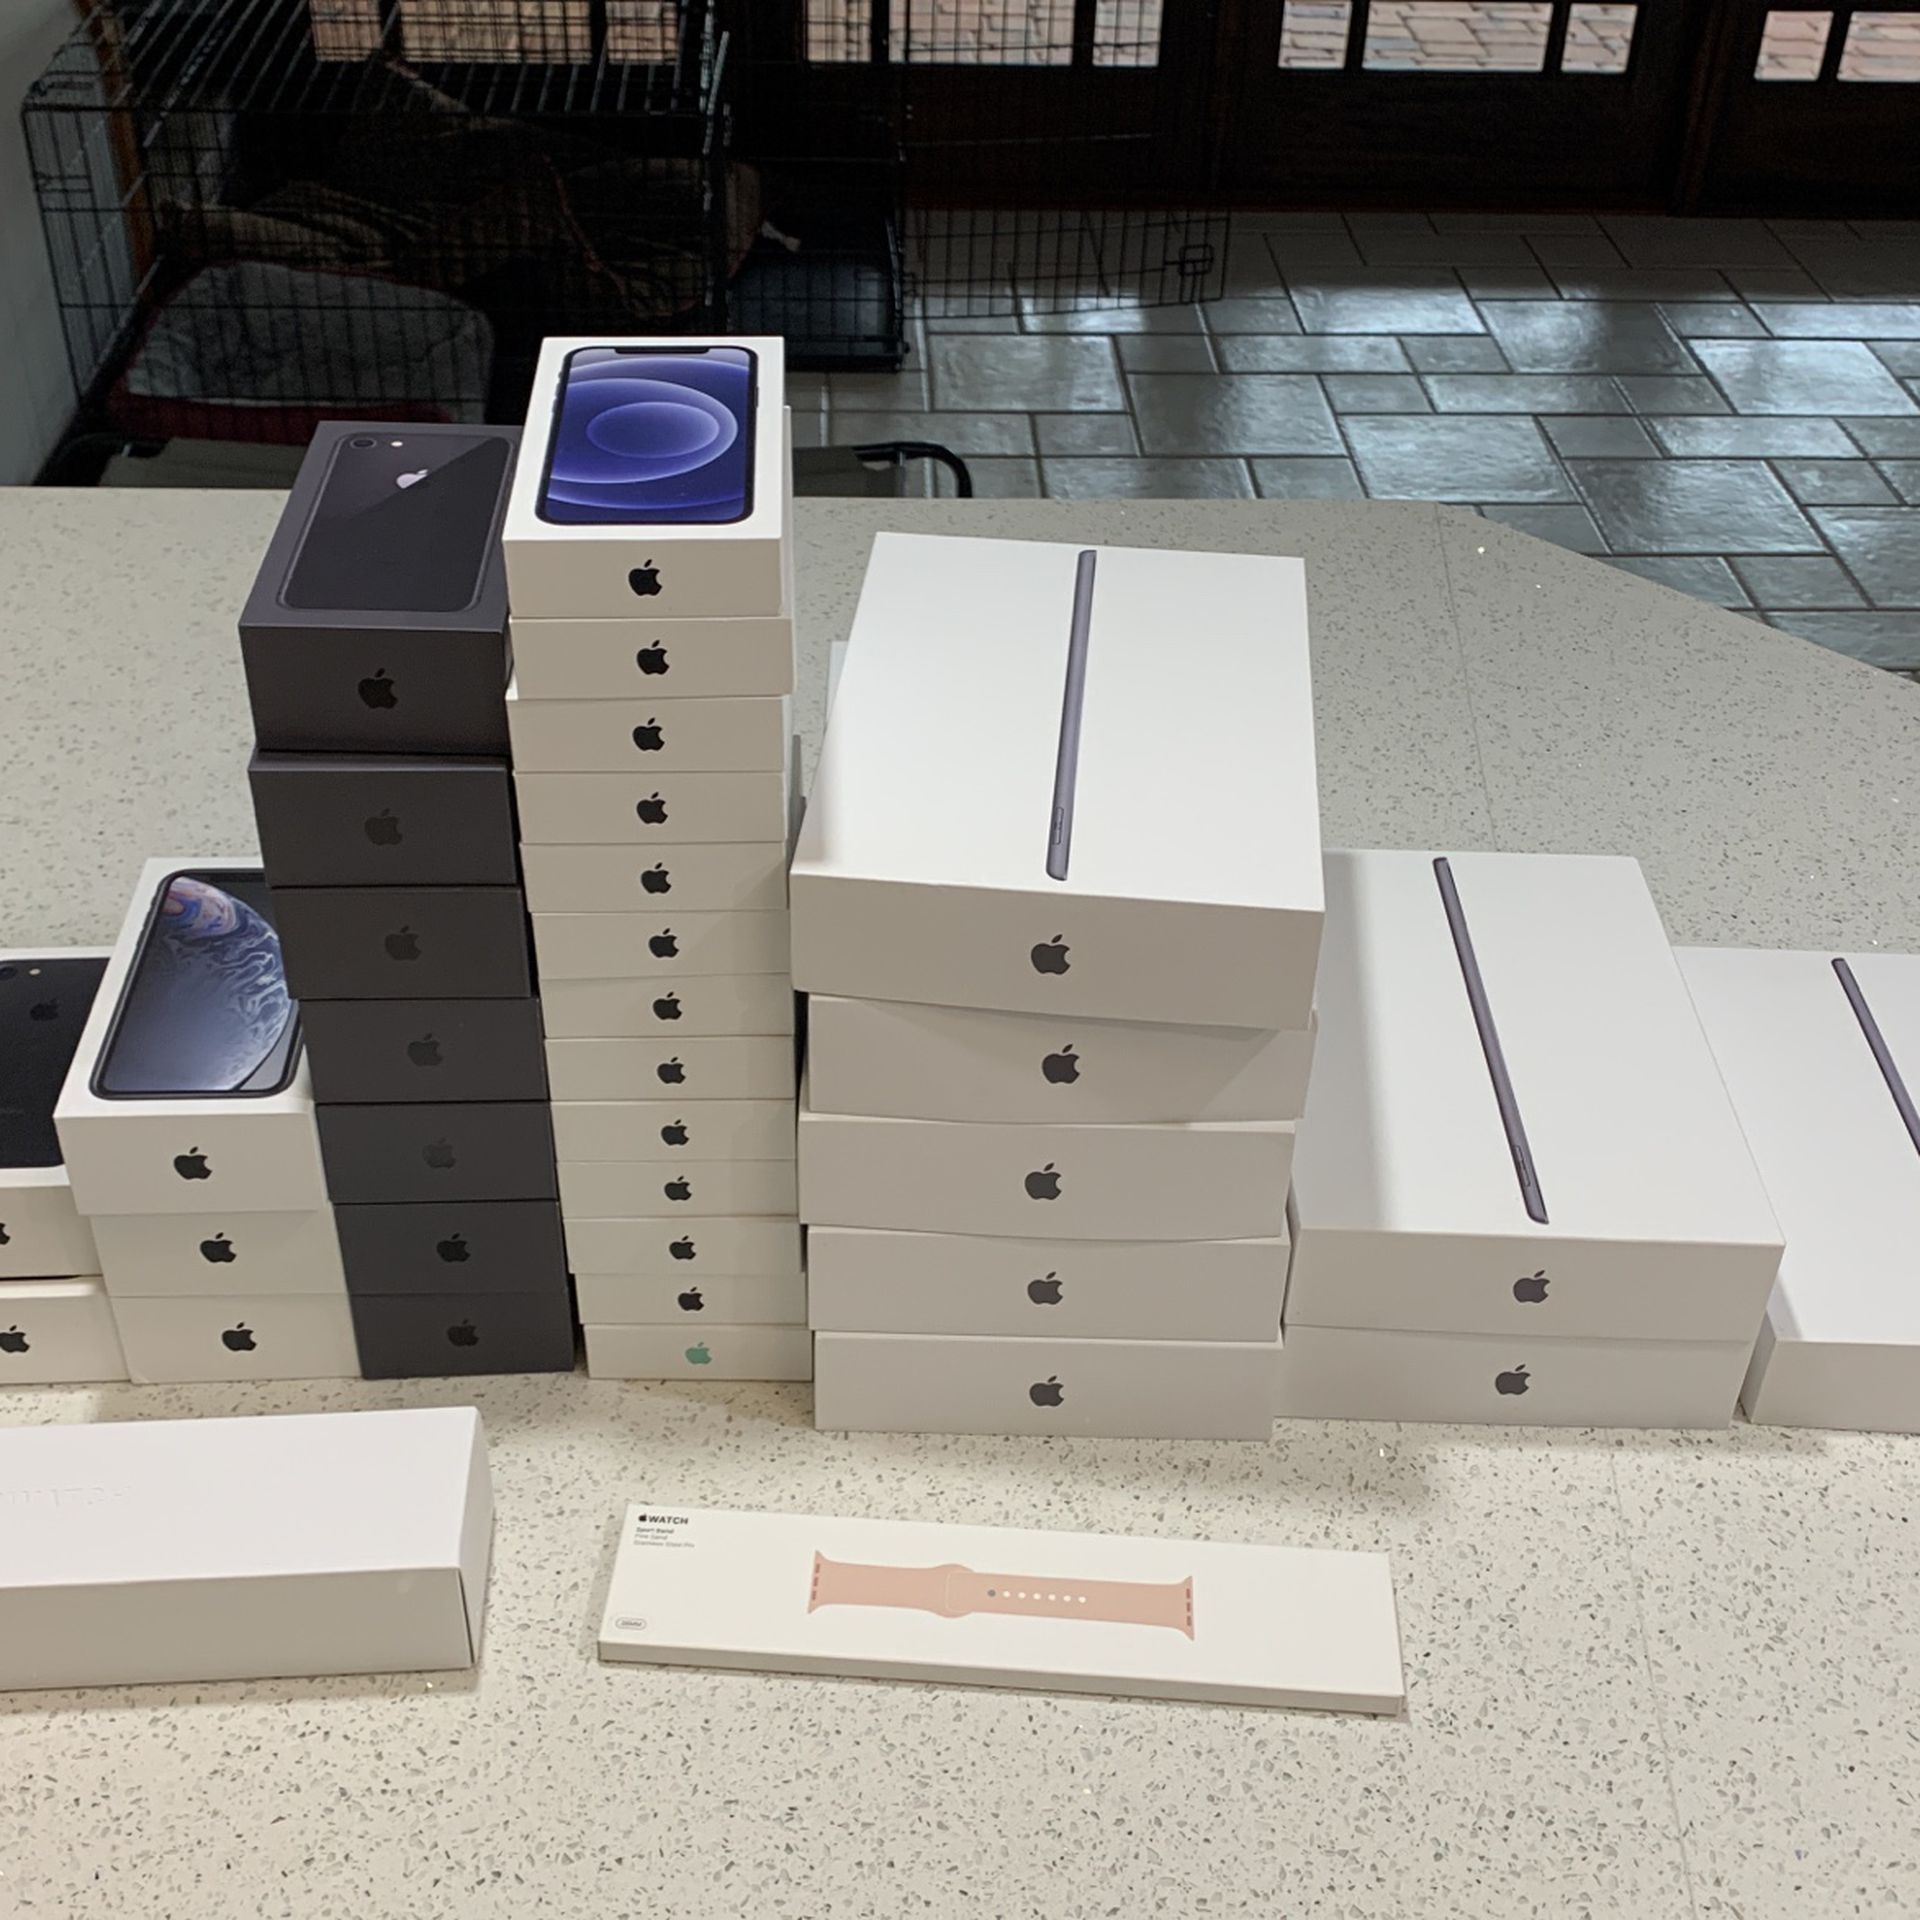 Empty Apple Product Boxes 